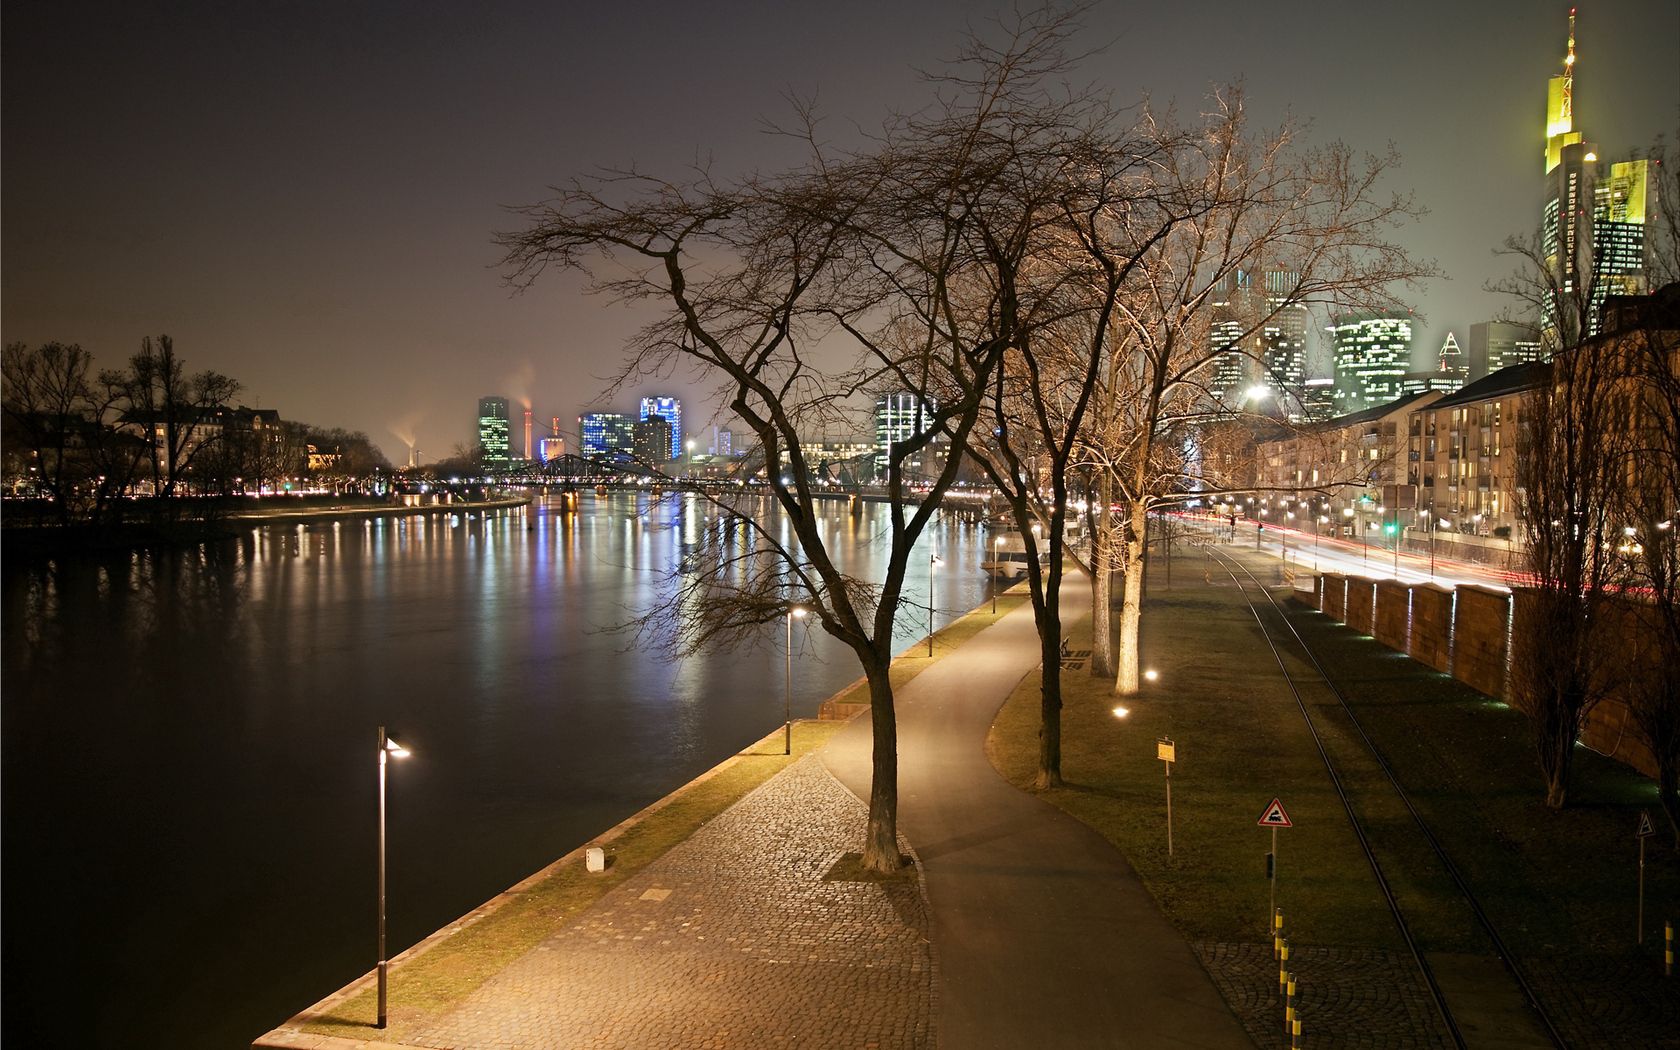 cities, water, houses, trees, lights, pier, road, lanterns, wall, skyscrapers, evening, life, dahl, distance, square, wharf, mostovaya, pavement, channel, buildings, strait, frankfurt, vessel, railways, railroads, built for android